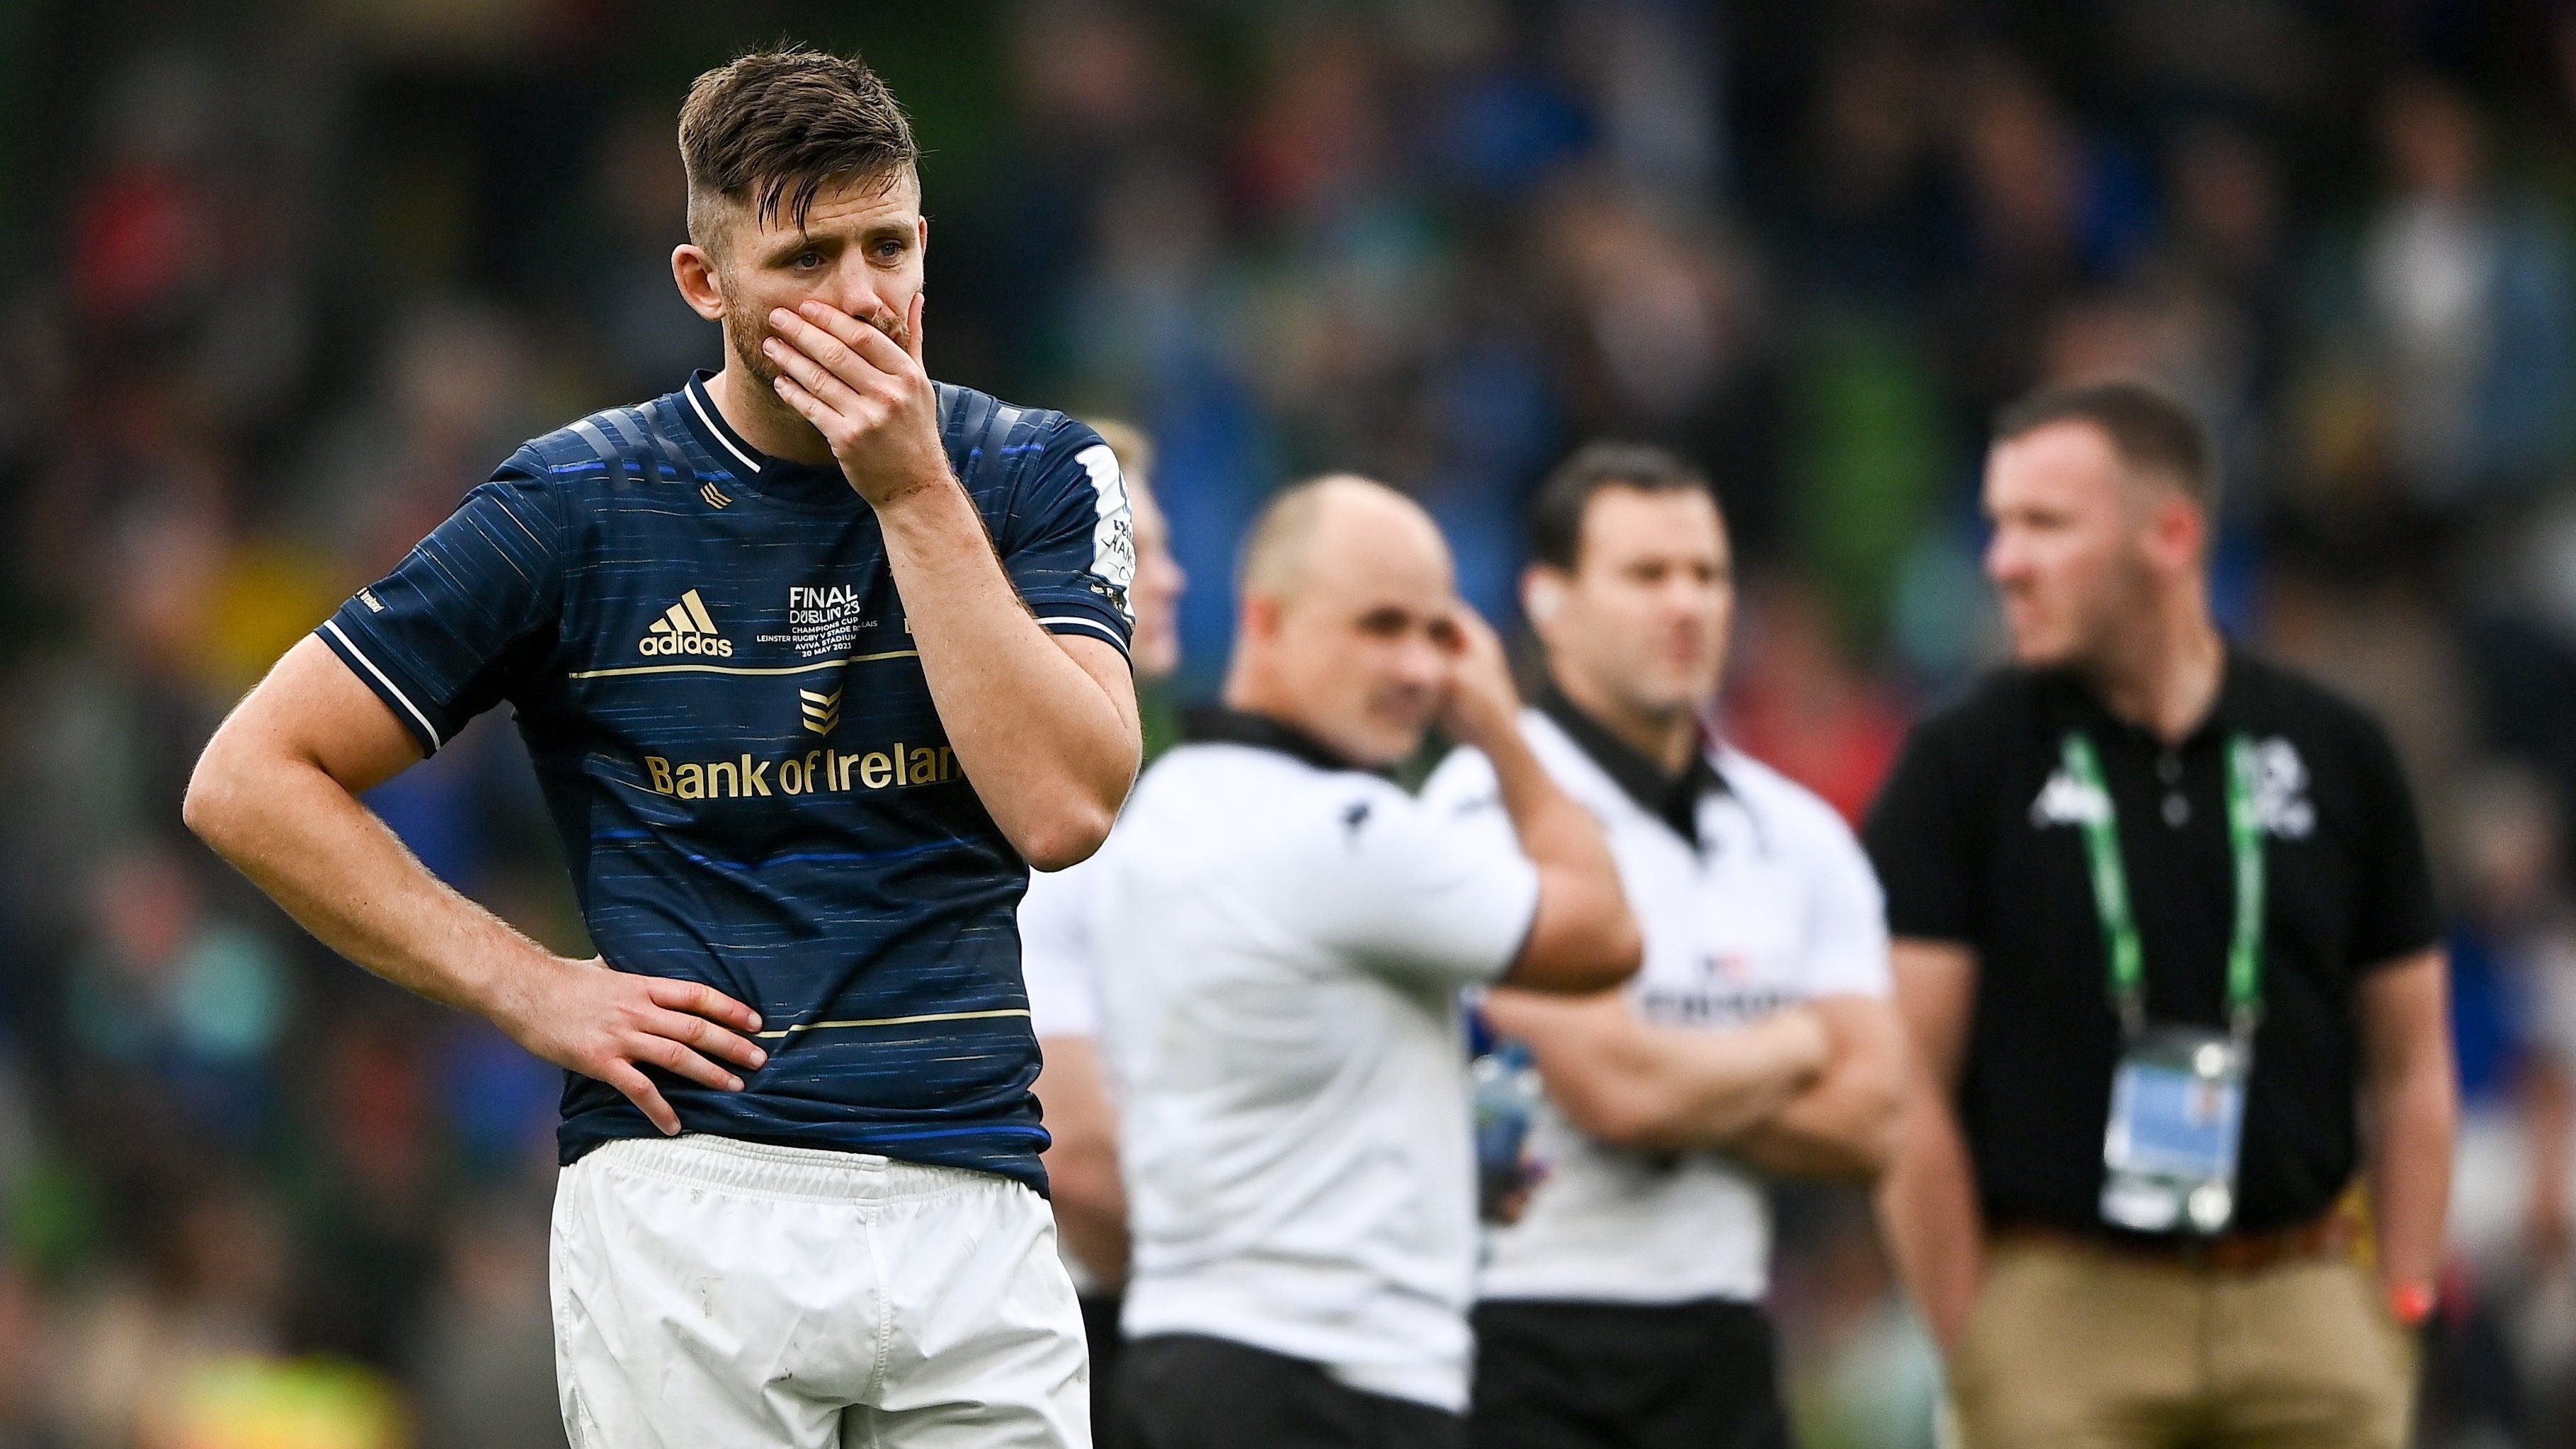 Leinster have lost back-to-back Champions Cup finals to La Rochelle, with last year’s defeat in Dublin particularly hard to take for Ross Byrne and his team-mates